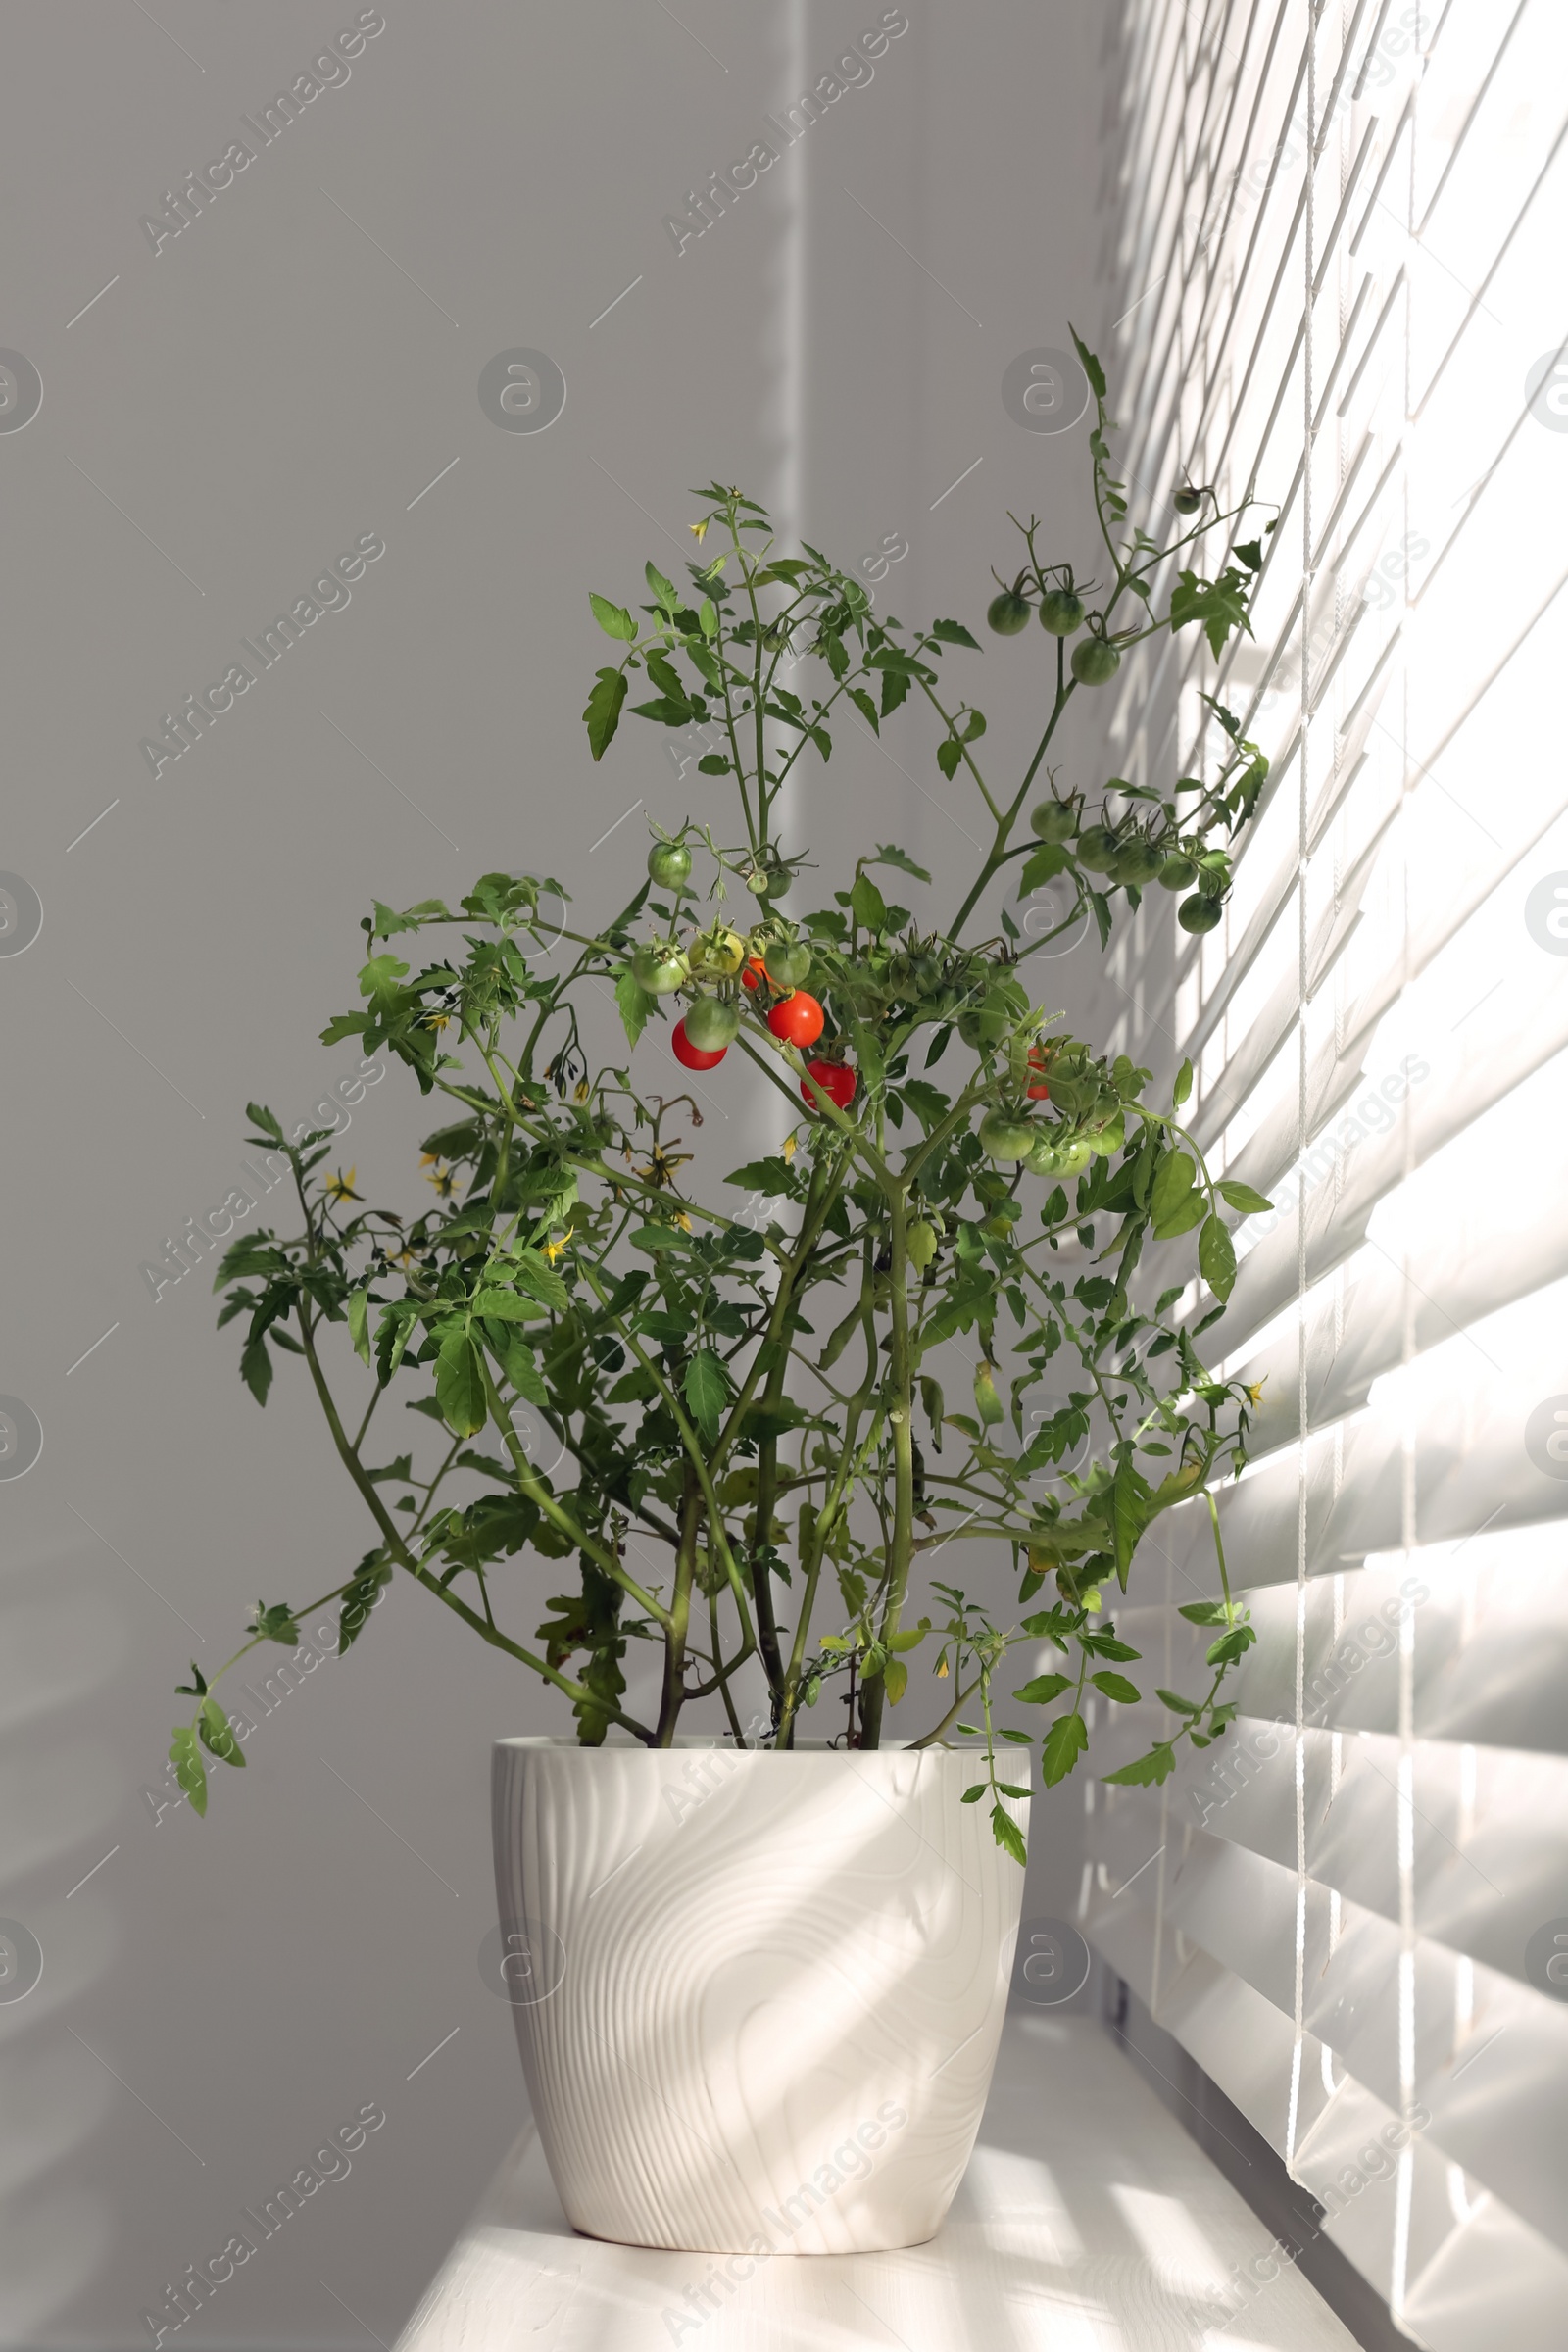 Photo of Tomato plant in pot on window sill indoors